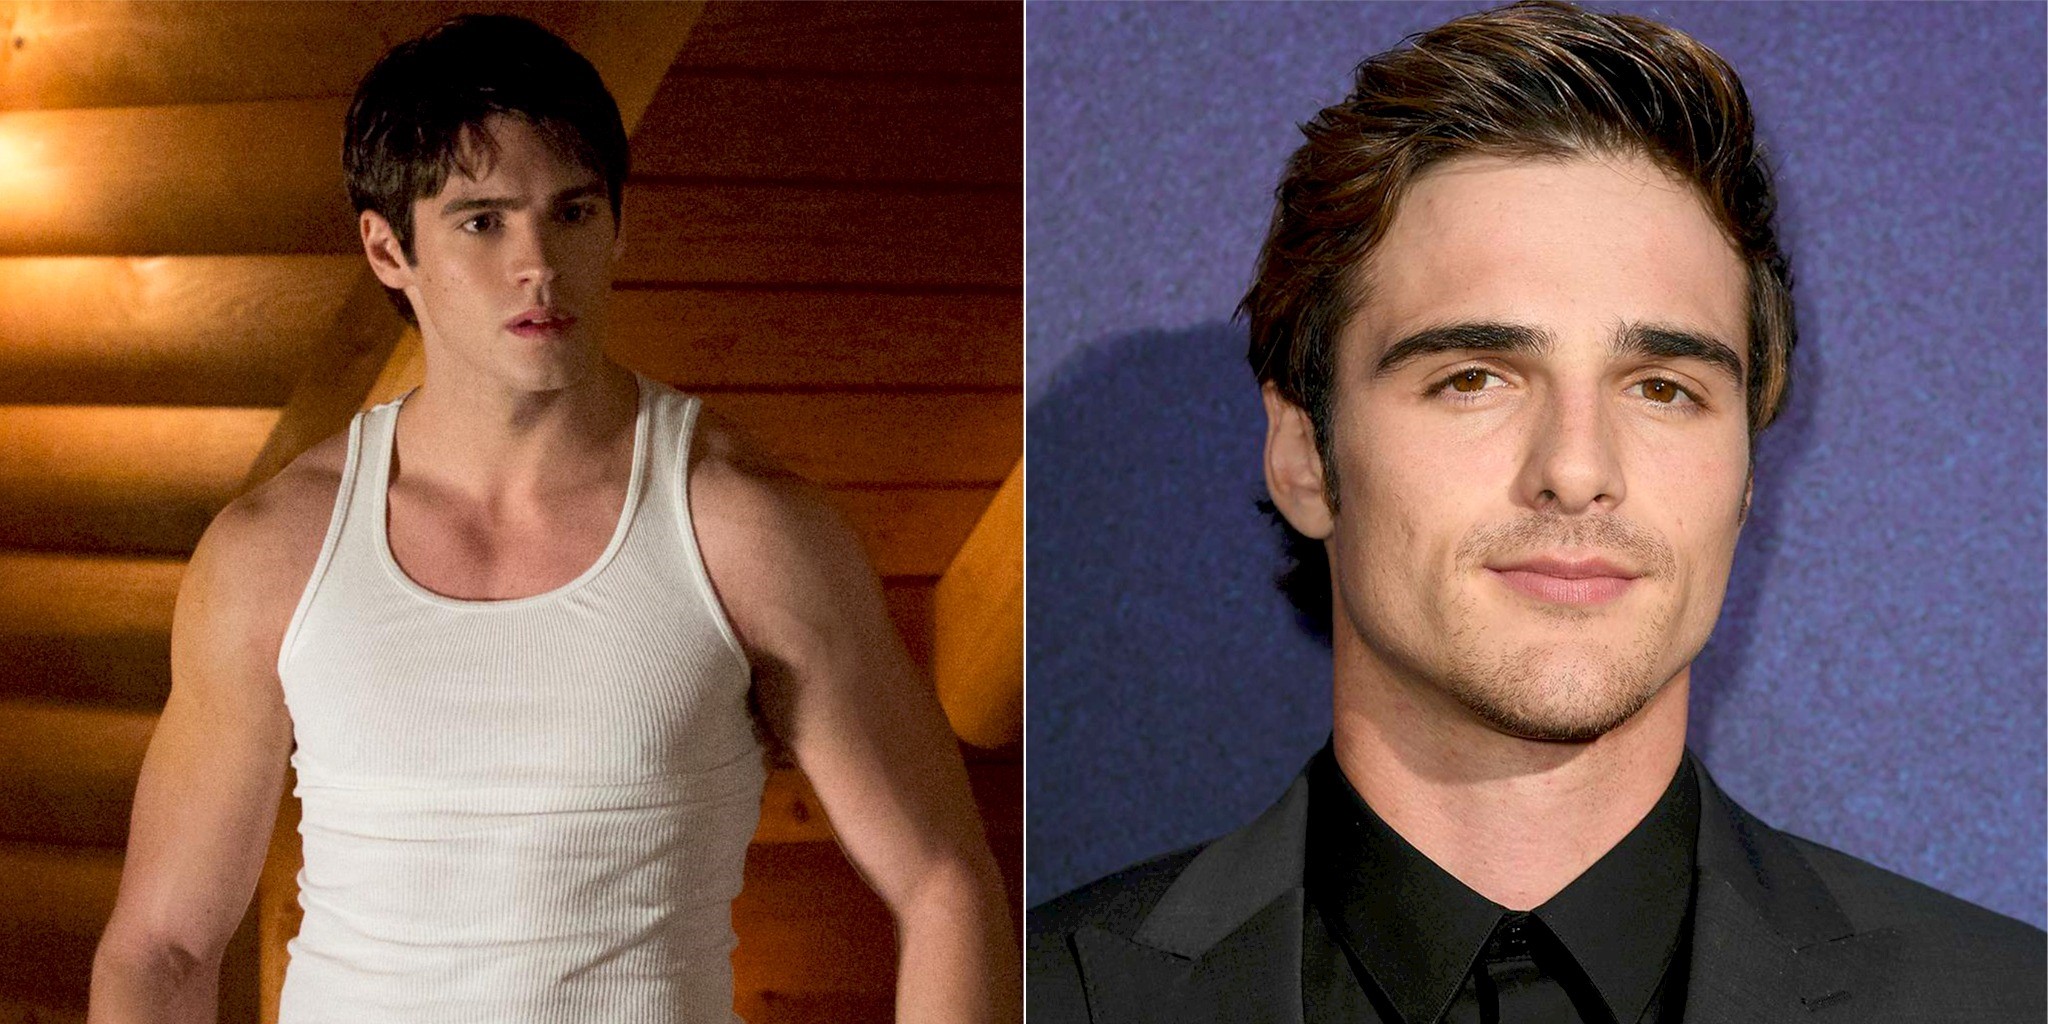 Is Jacob Elorbi Related to Steven R. McQueen